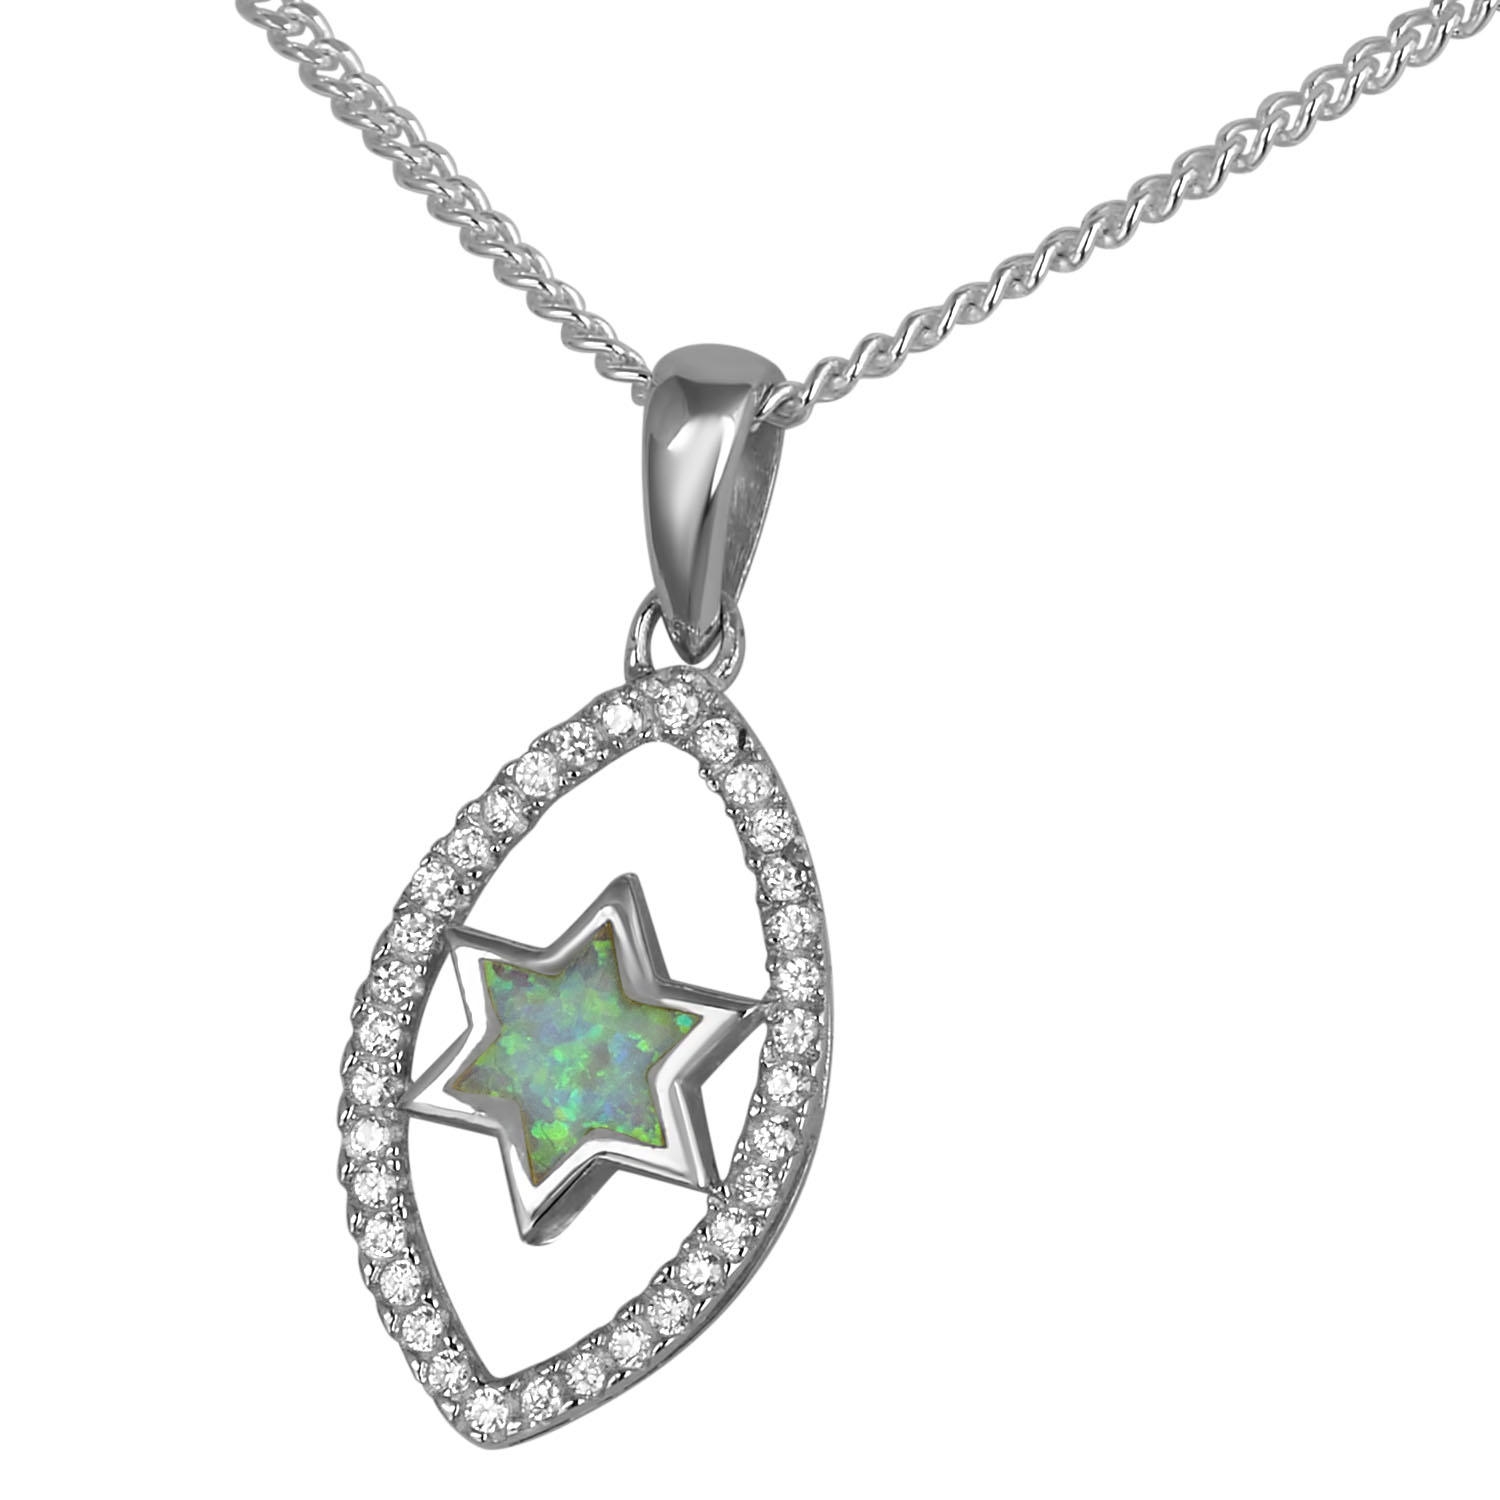 925 Sterling Silver Eye Necklace with Blue Opalite Star of David and Cubic Zirconia Stones - 1